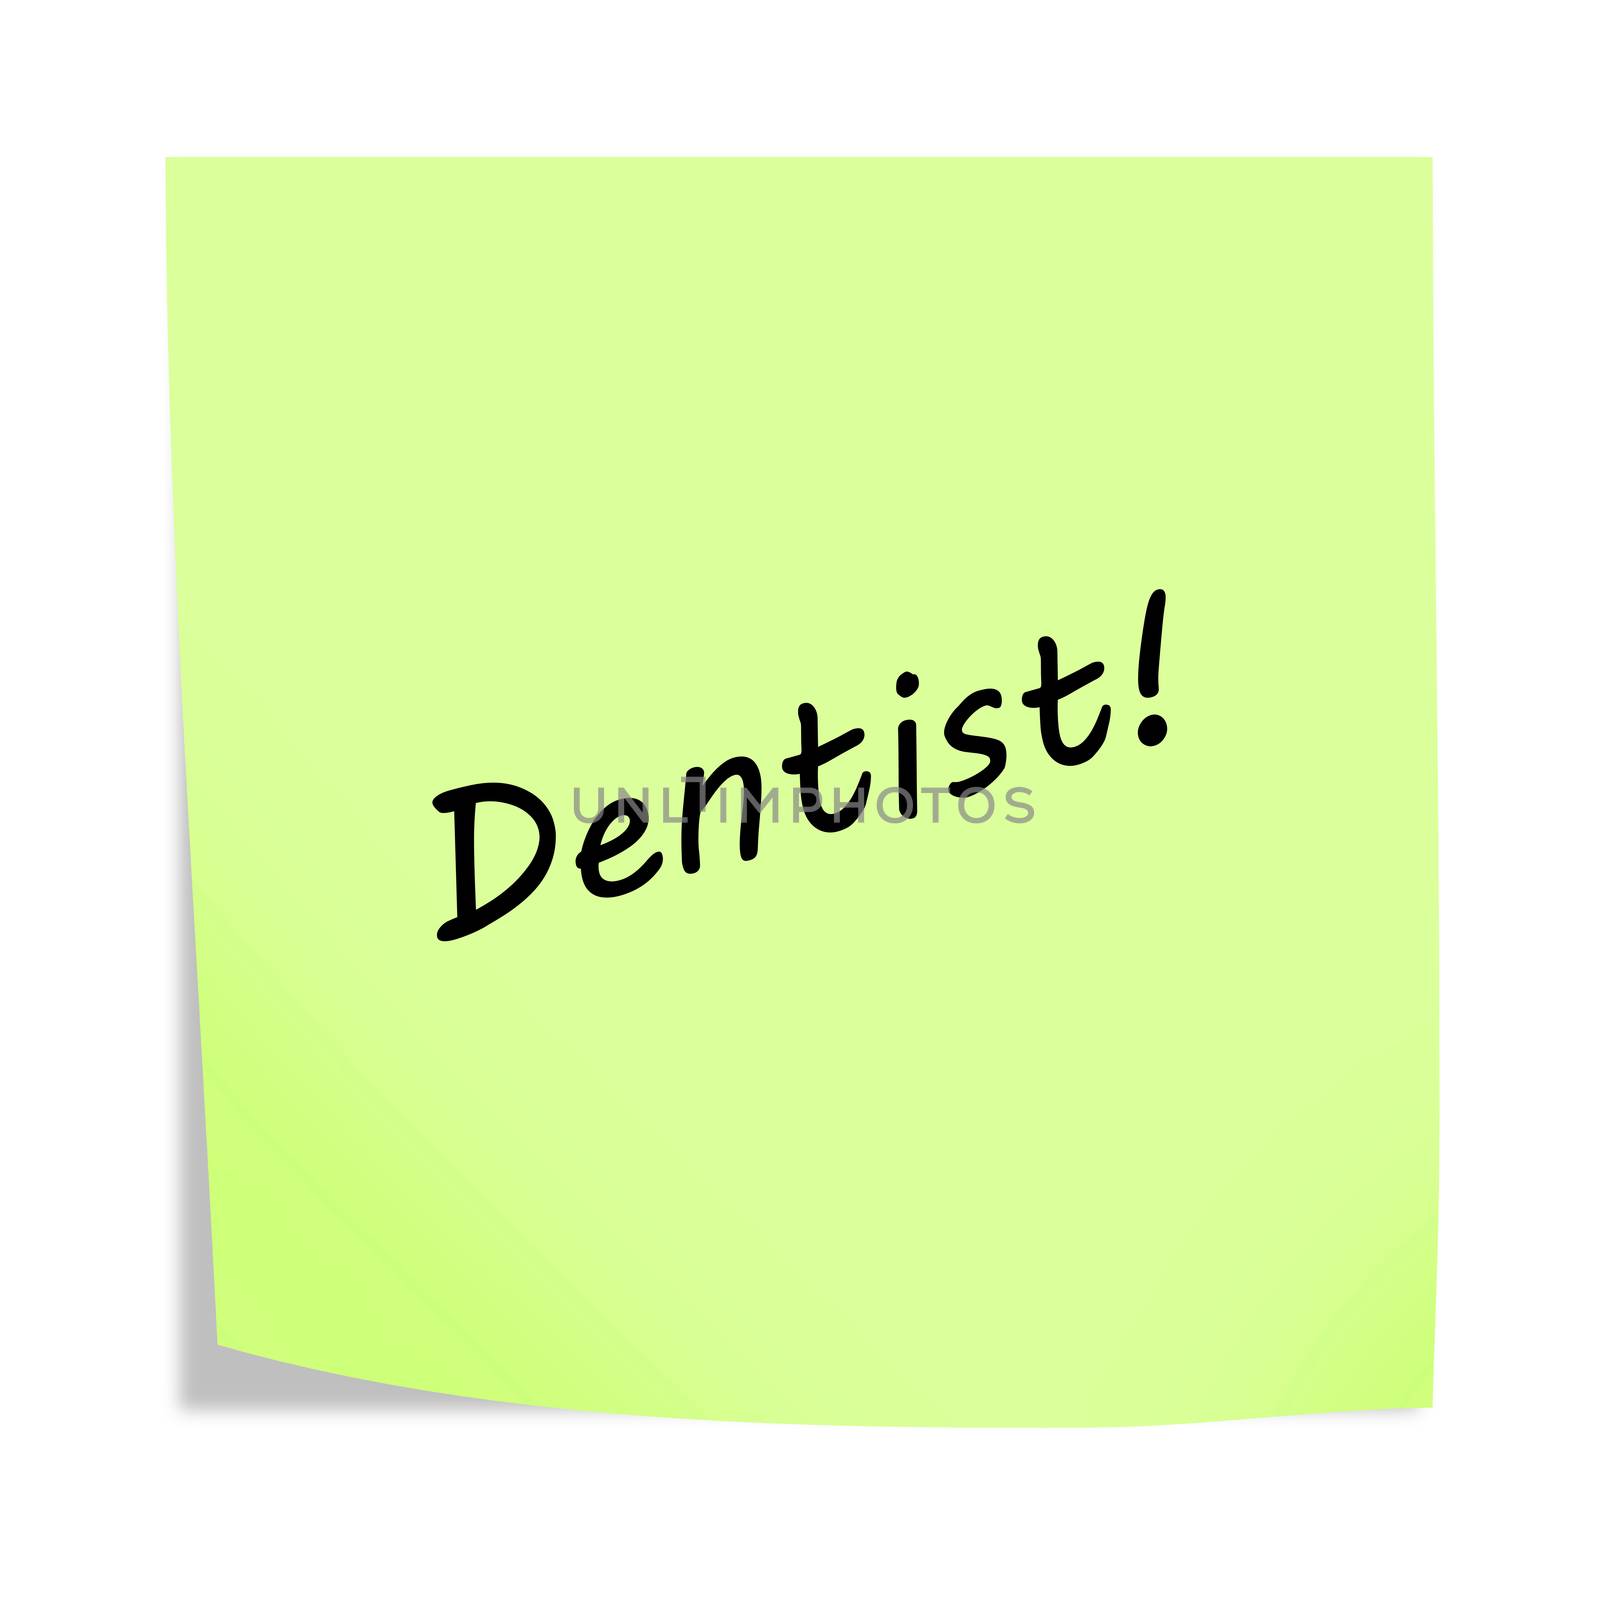 Dentist reminder post note isolated on white with clipping path by VivacityImages